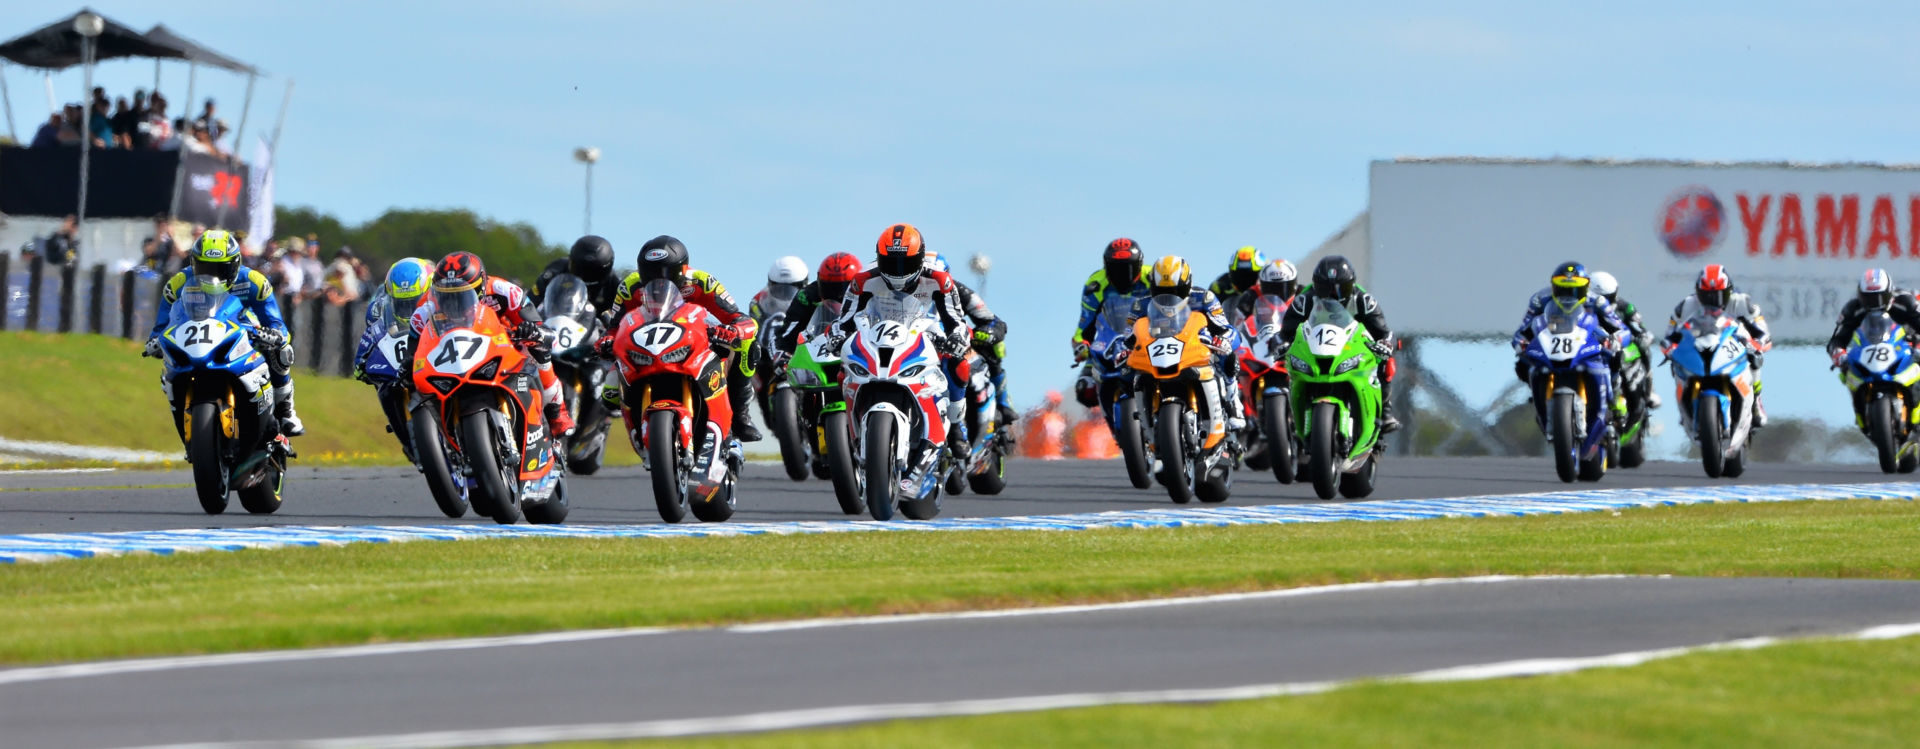 The start of an Australian Superbike race at Phillip Island in February. Photo courtesy Motorcycling Australia.